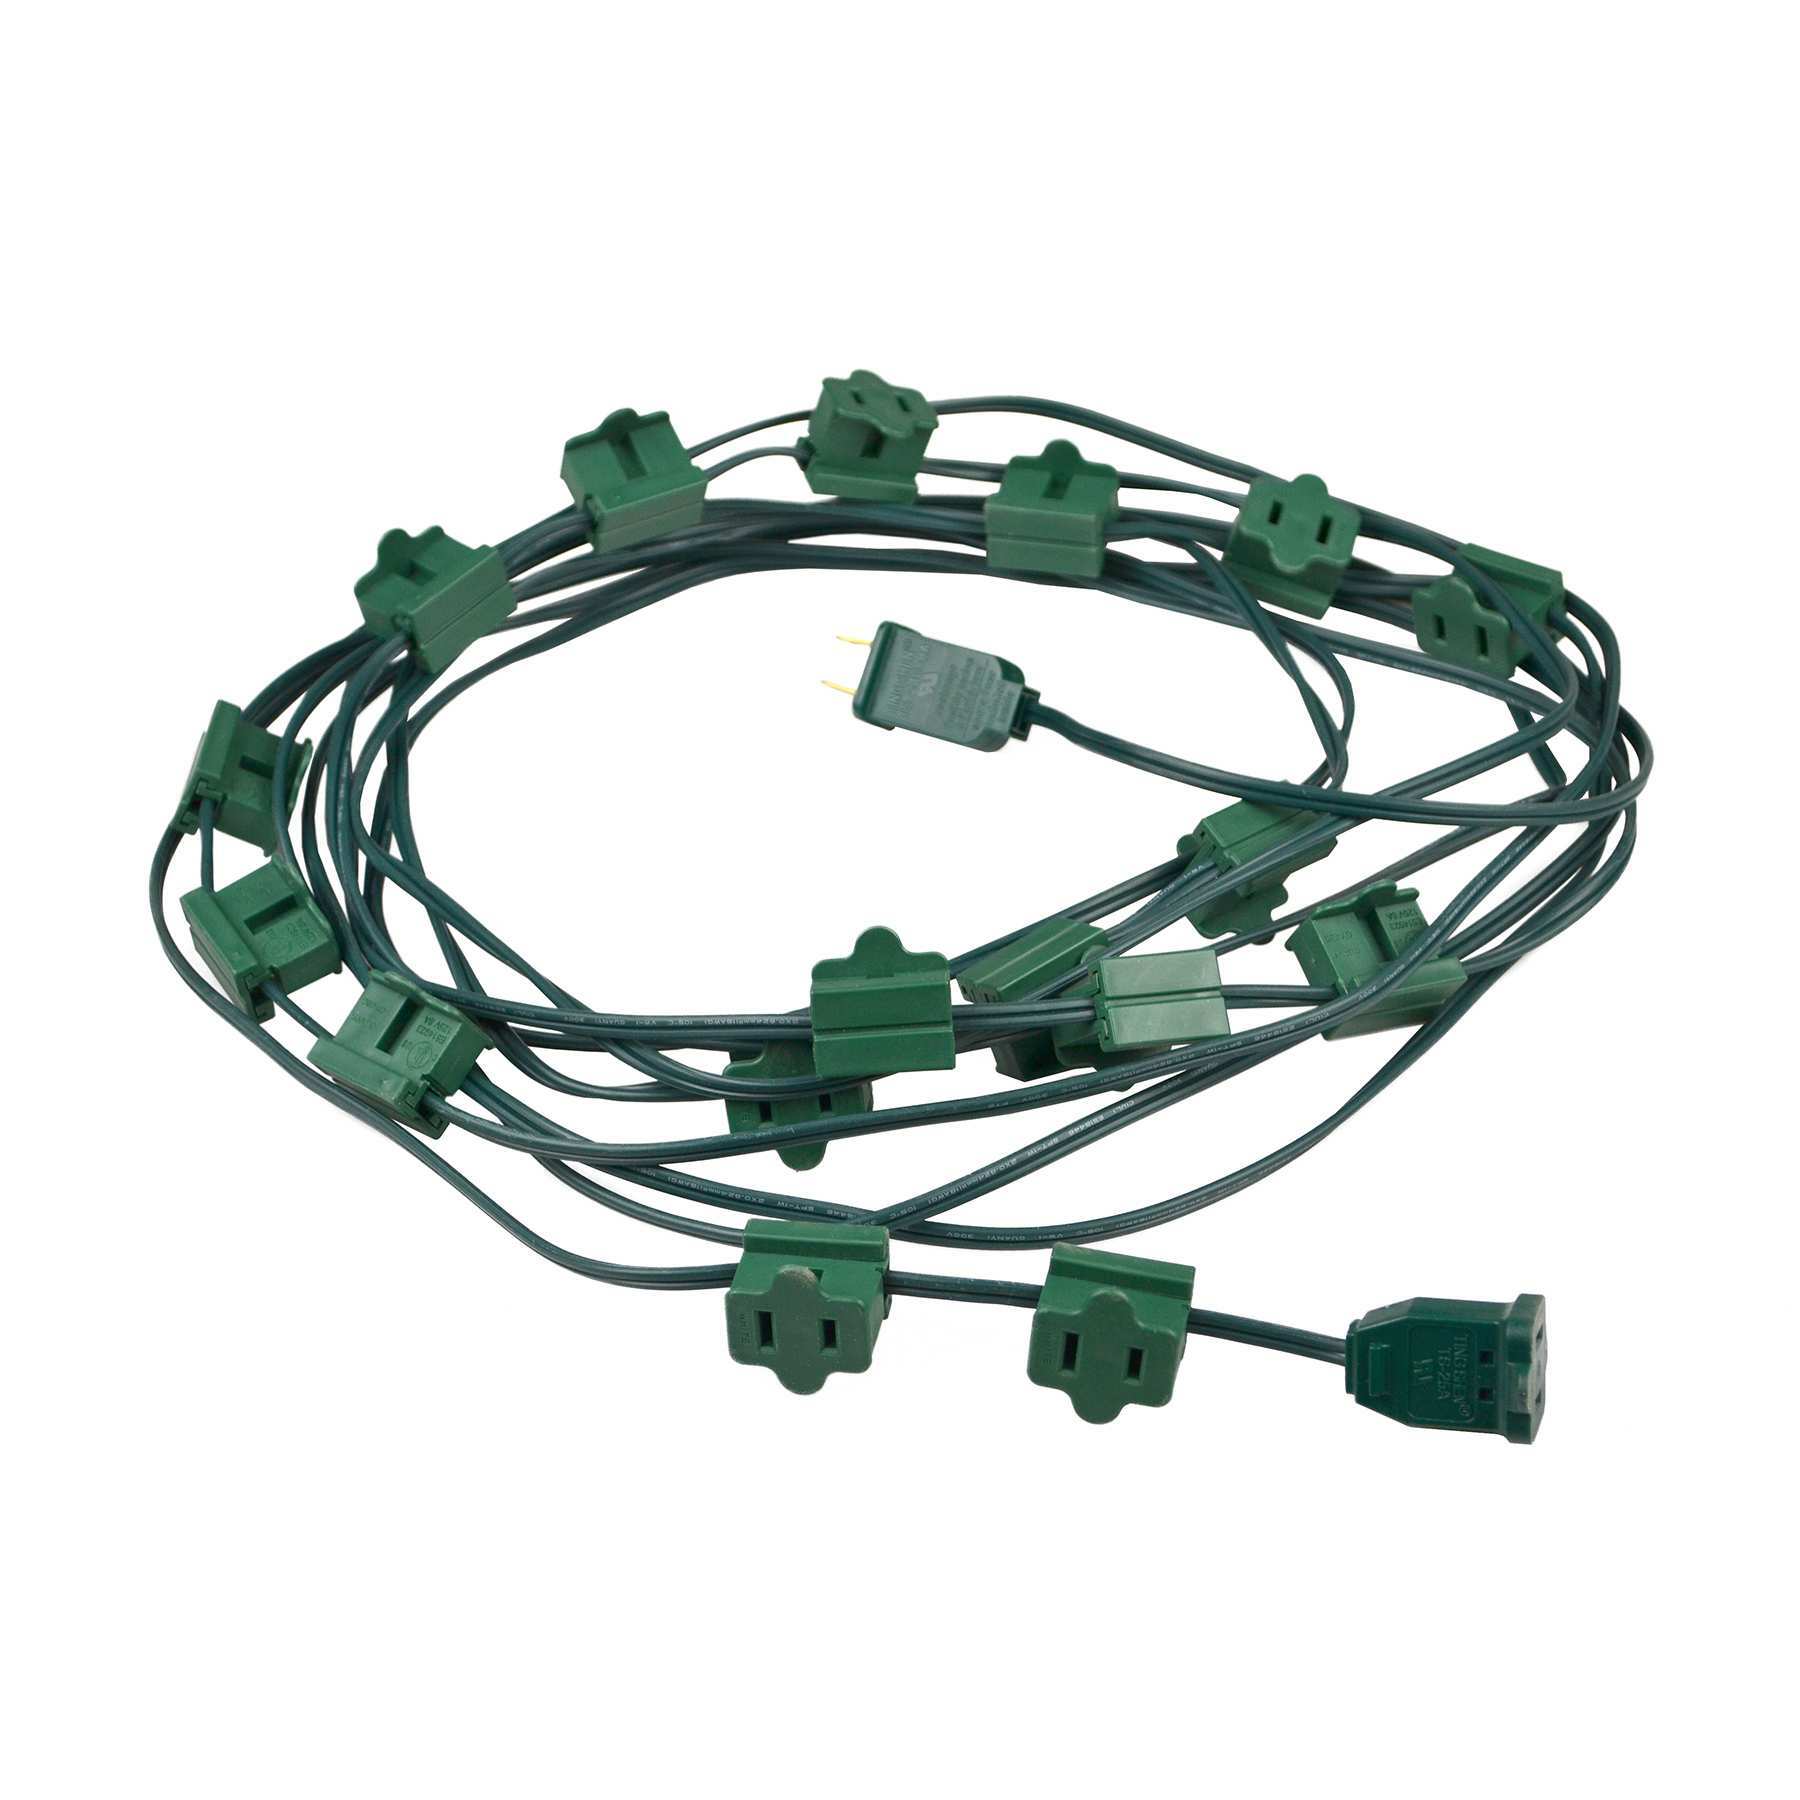 25′ Green Cord with 3 inline plugs every 4′